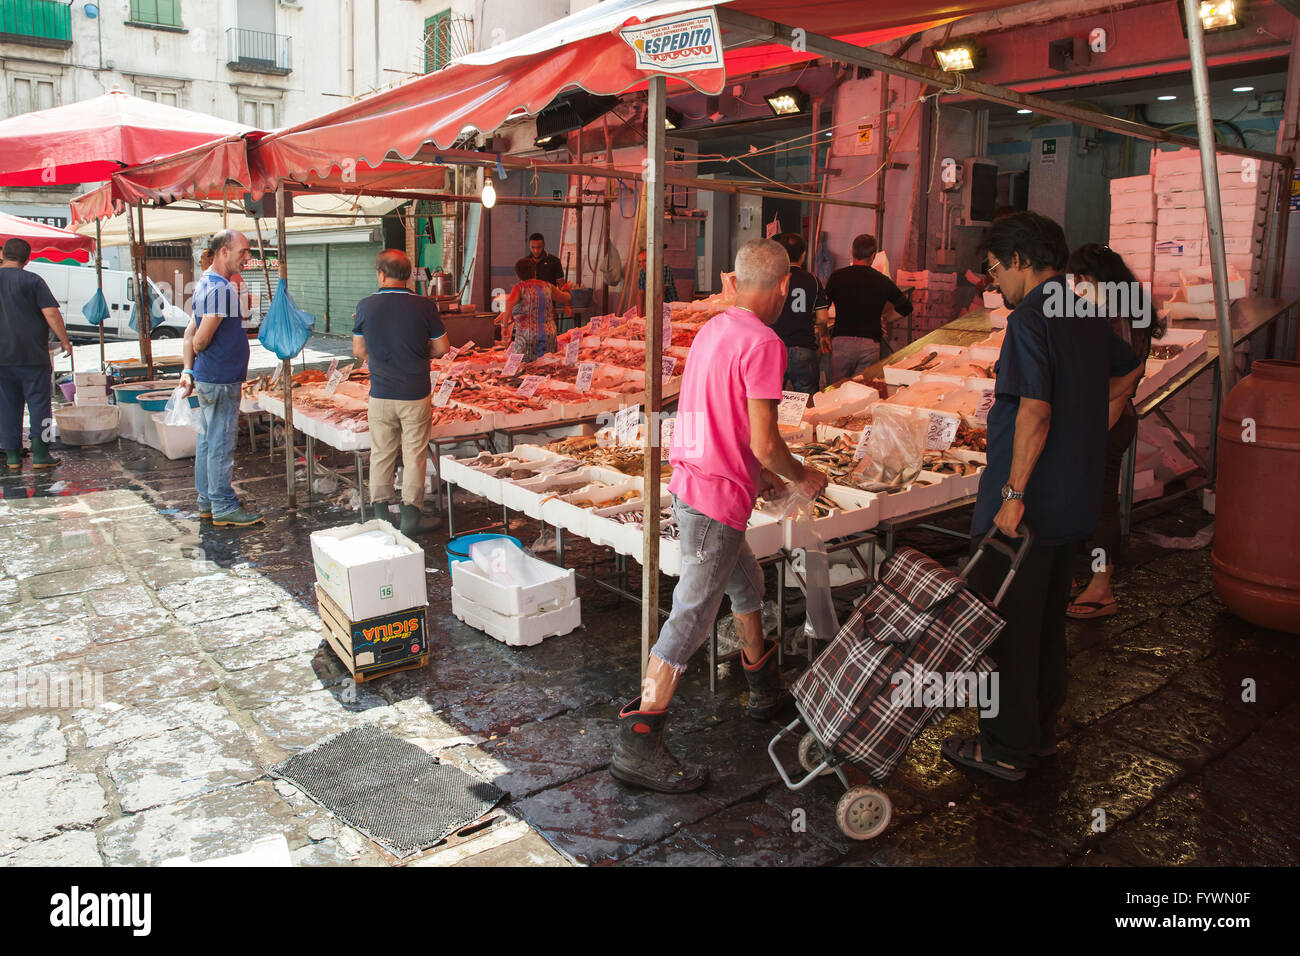 Naples, Italy - August 9, 2015: Different types of fish lay on counters of street marketplace in Naples, buyers wait for clients Stock Photo